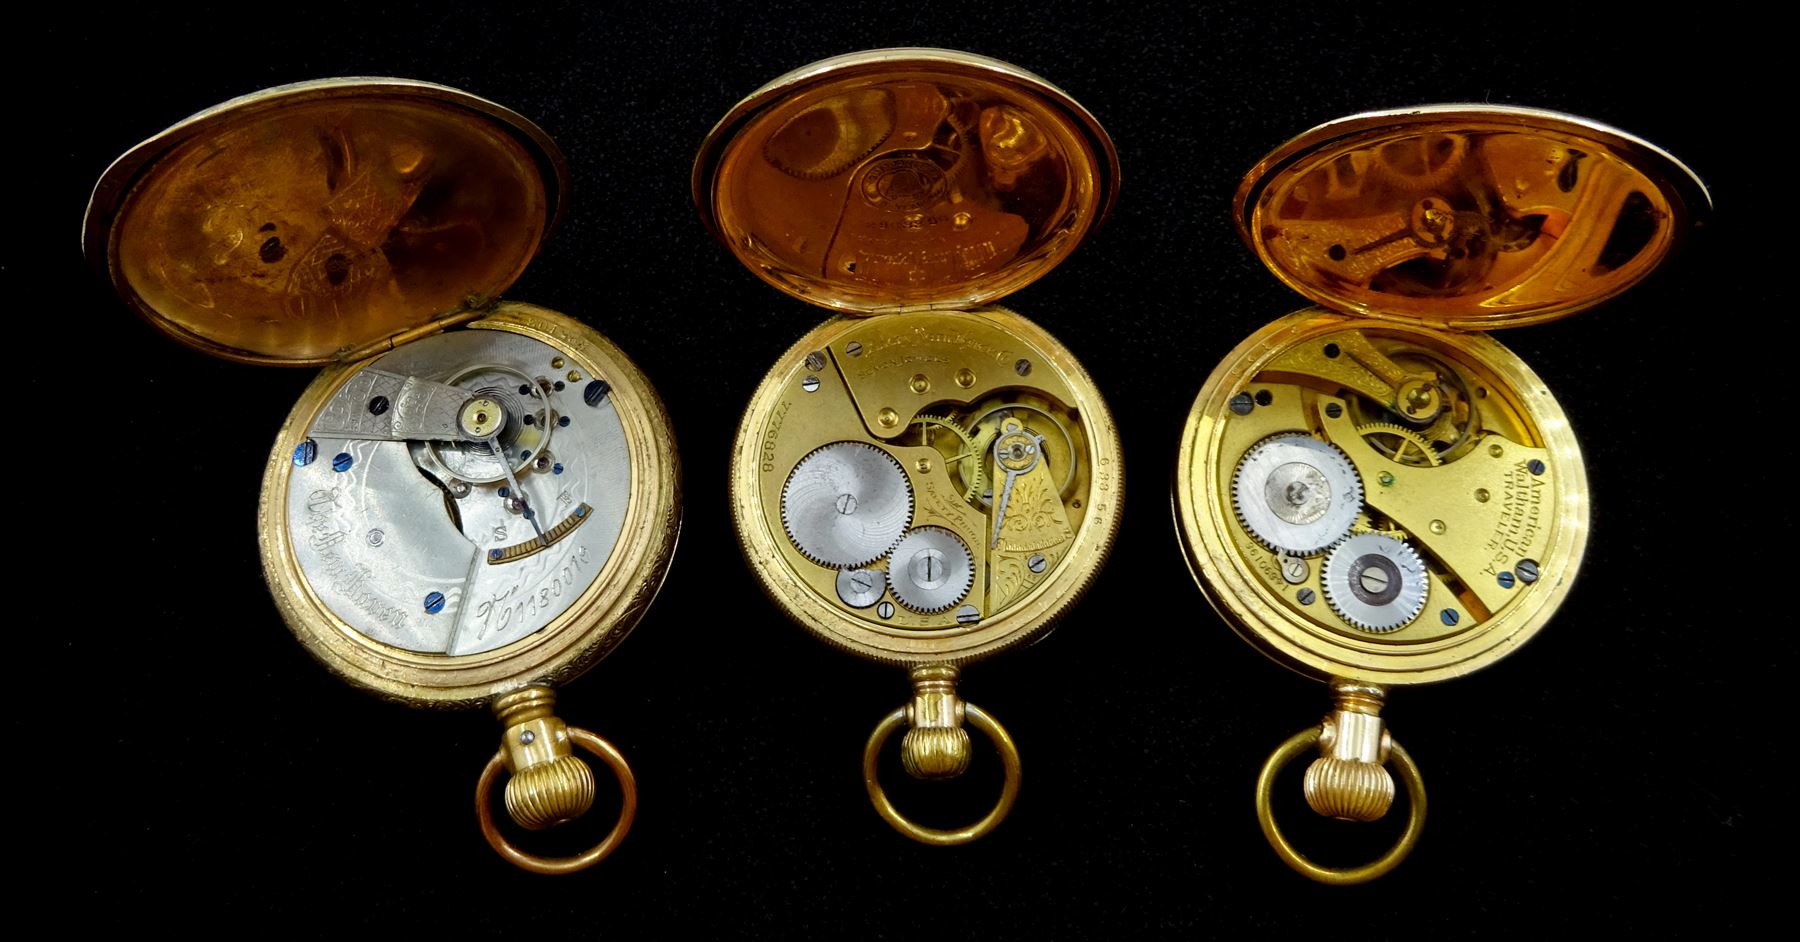 Three American gold-plated pockets including full hunter keyless Traveller pocket watch by Waltham - Image 3 of 3